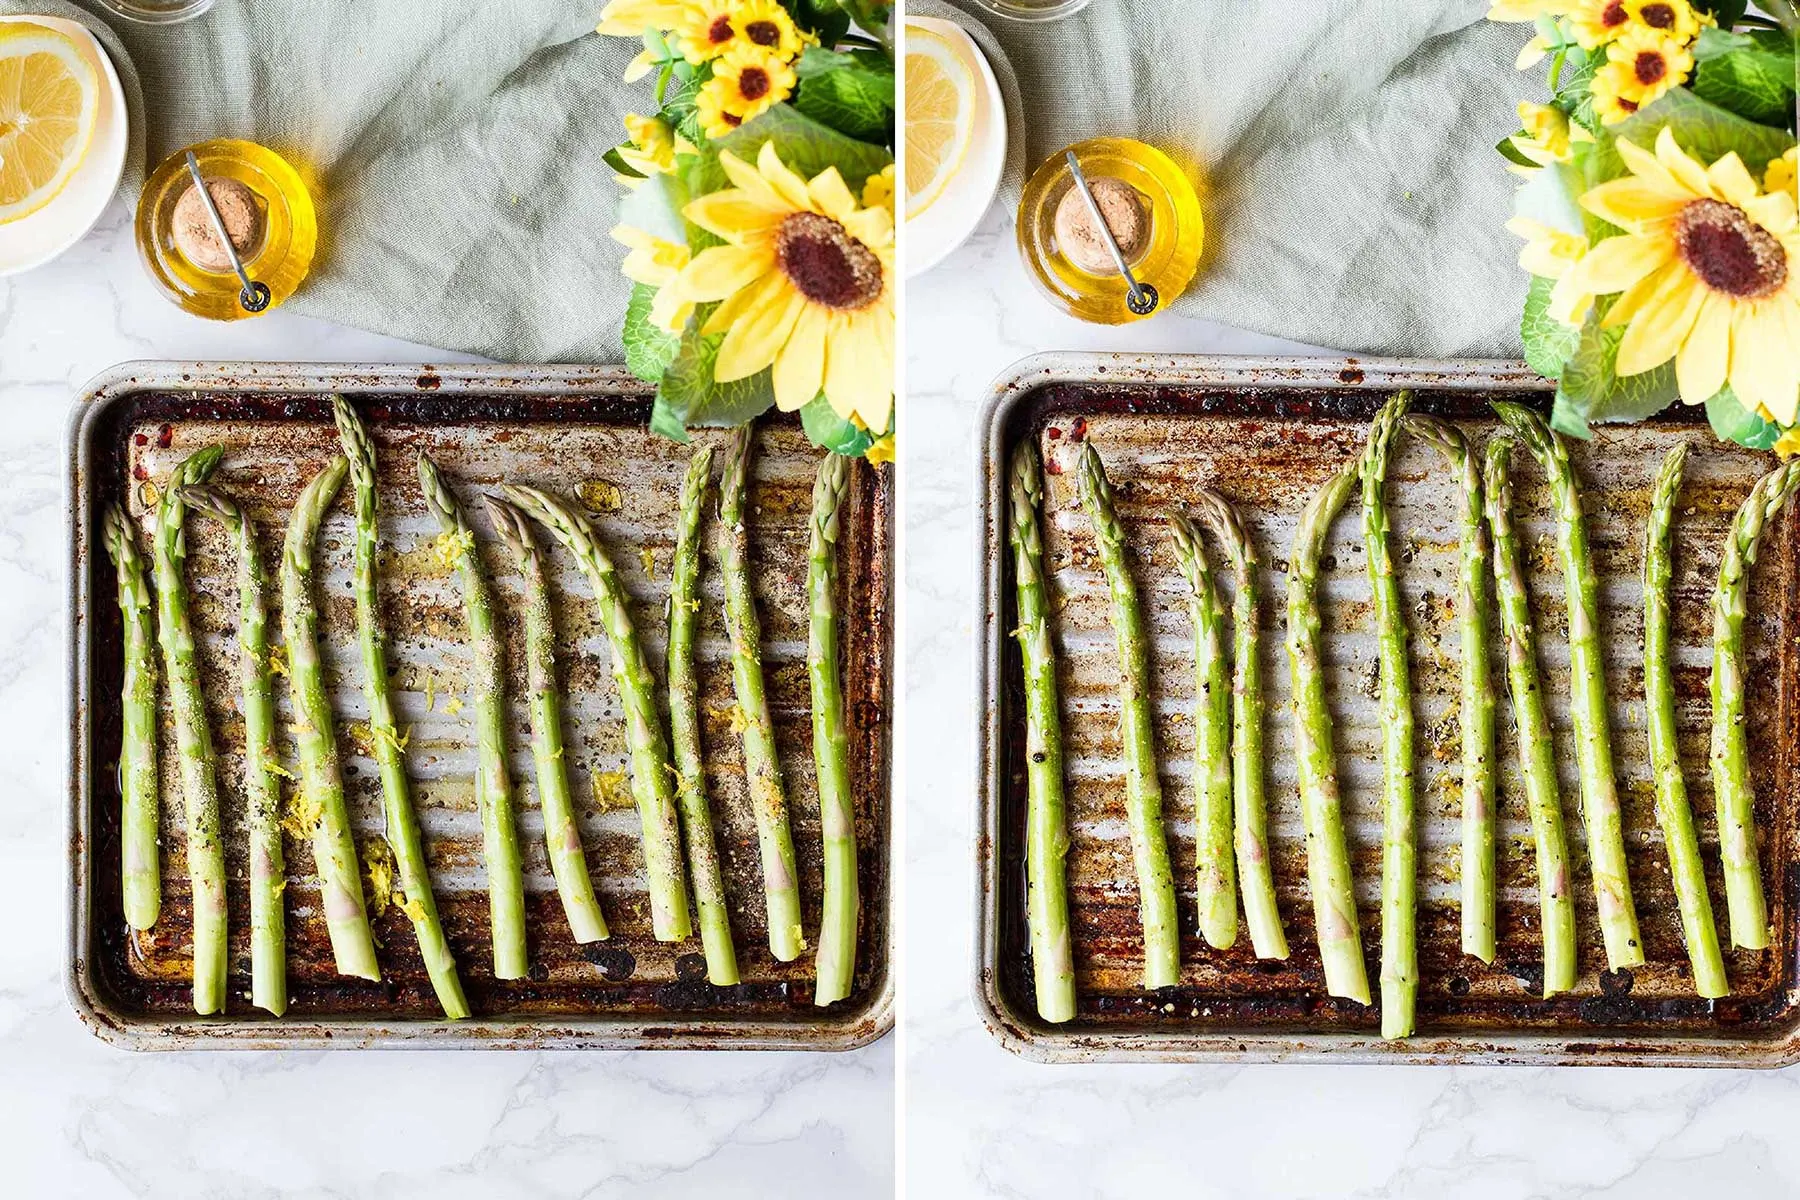 Steps to make roasted asparagus in the oven.